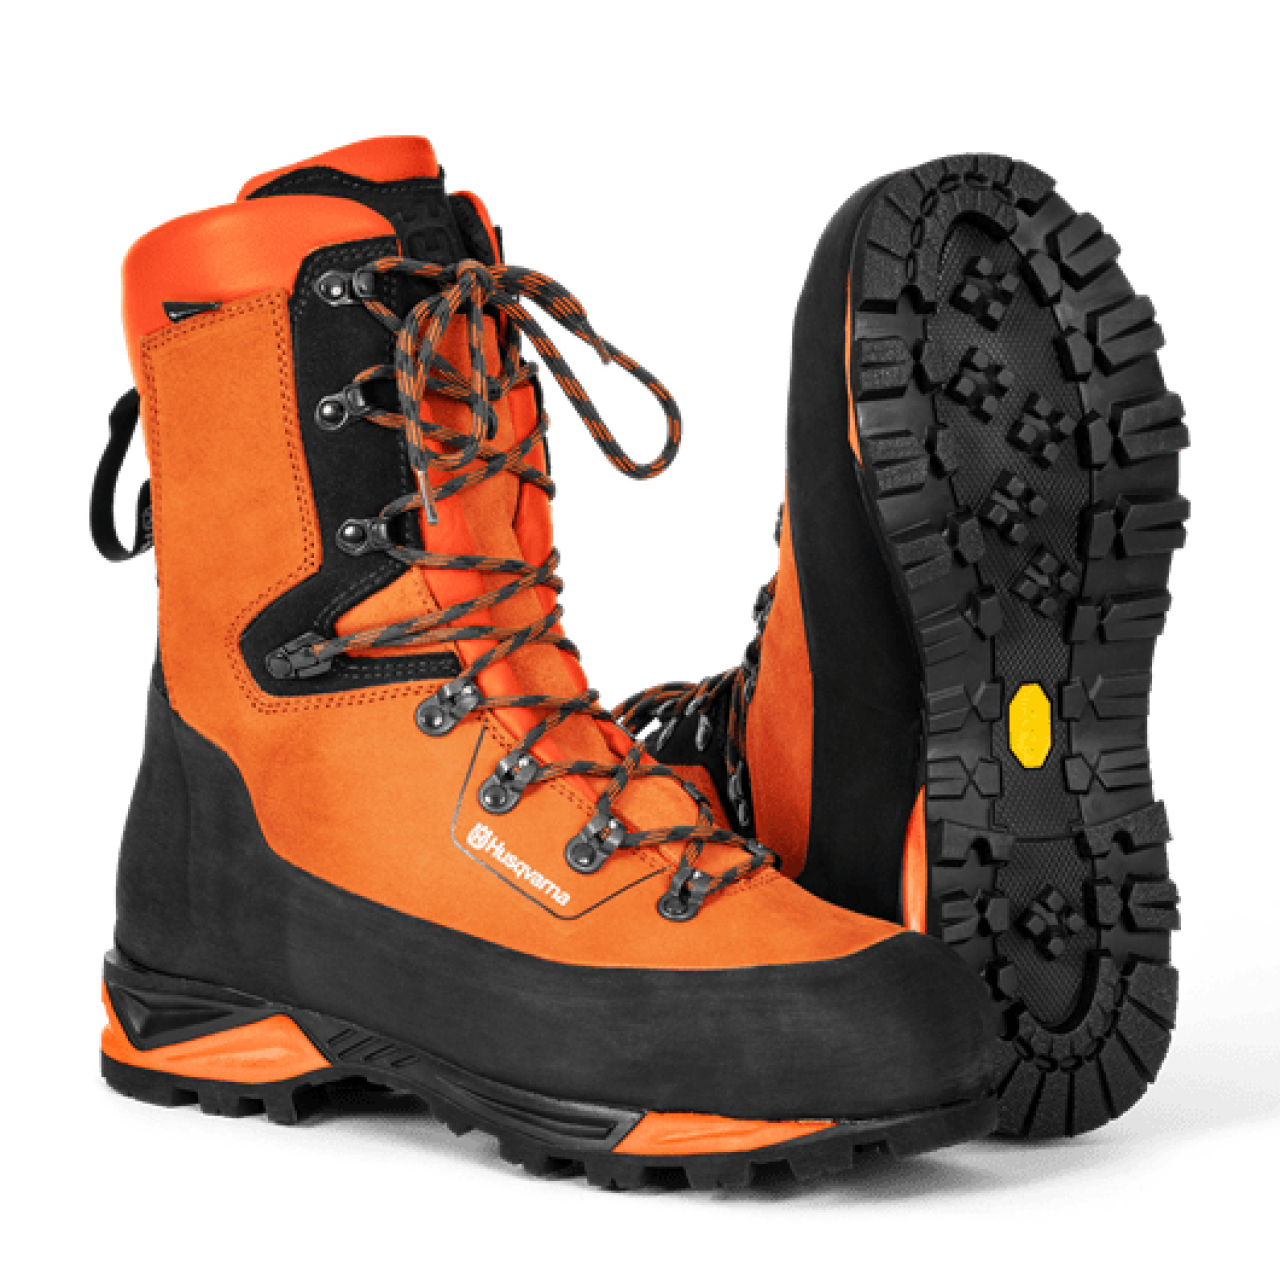 Stiefel Technical 24 Level 2 Gr. 41